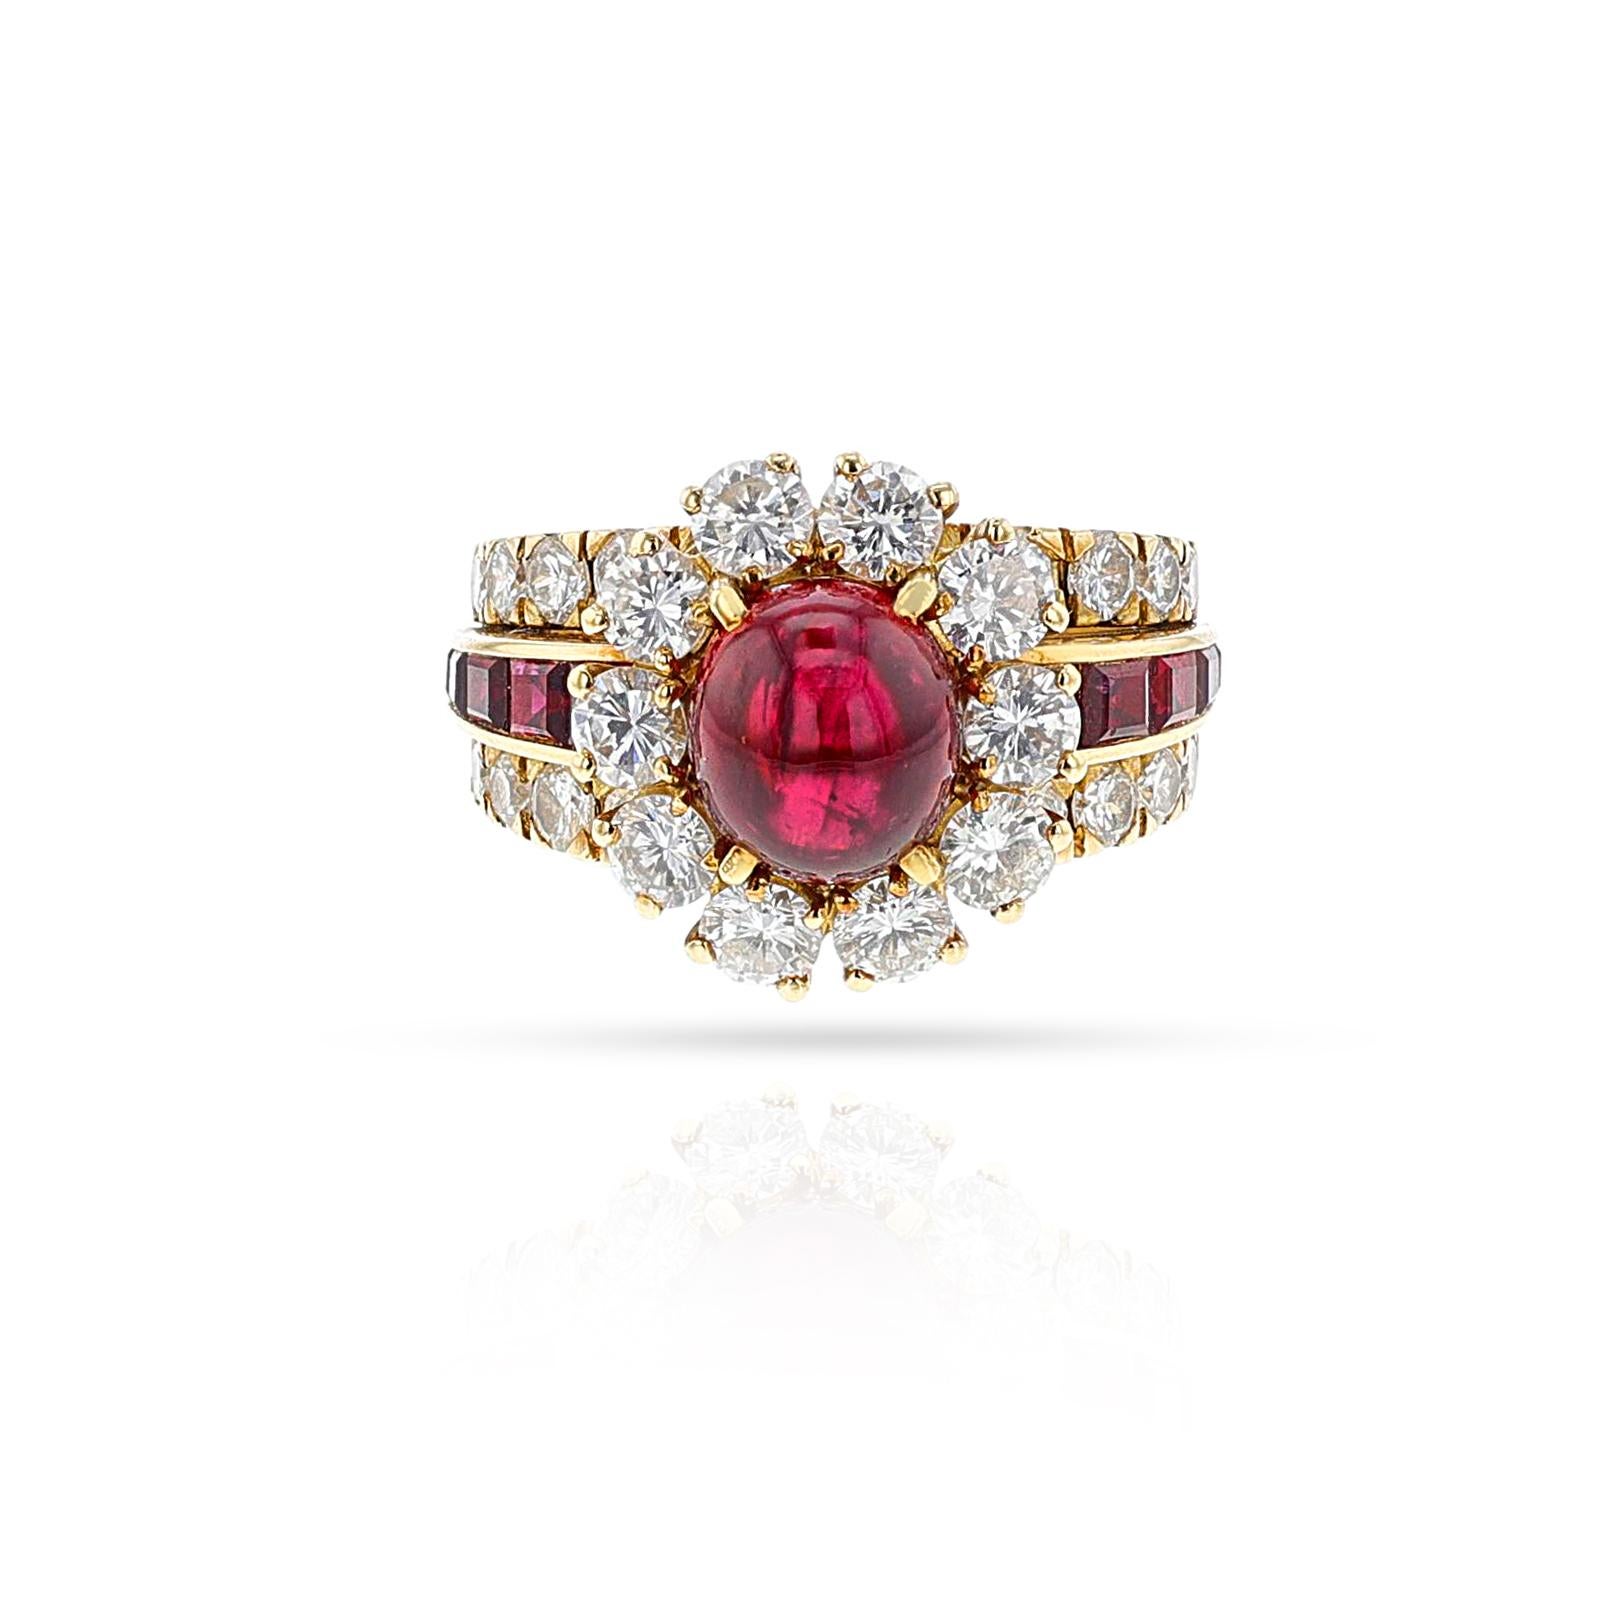 Van Cleef & Arpels Ruby Cabochon and Diamond Ring, 18k For Sale 3